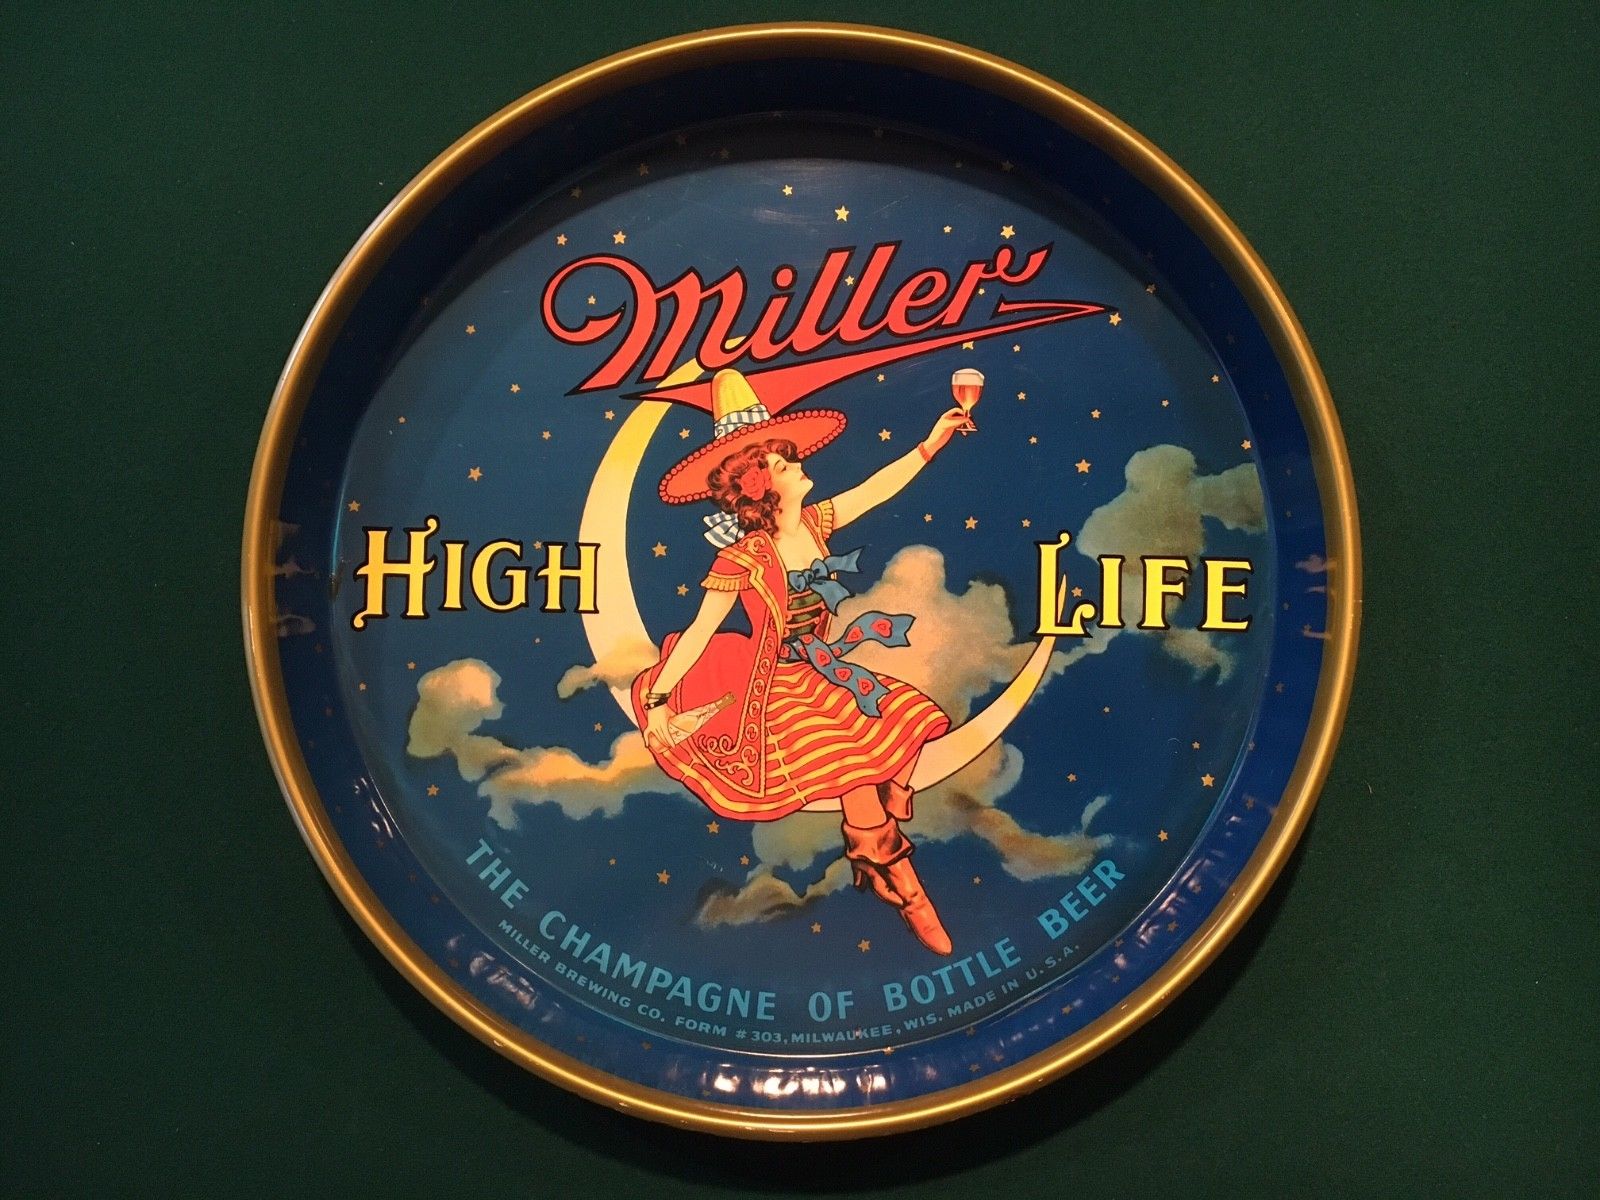 Vintage 50 S Miller High Life Beer Serving Tray With Girl On The Moon